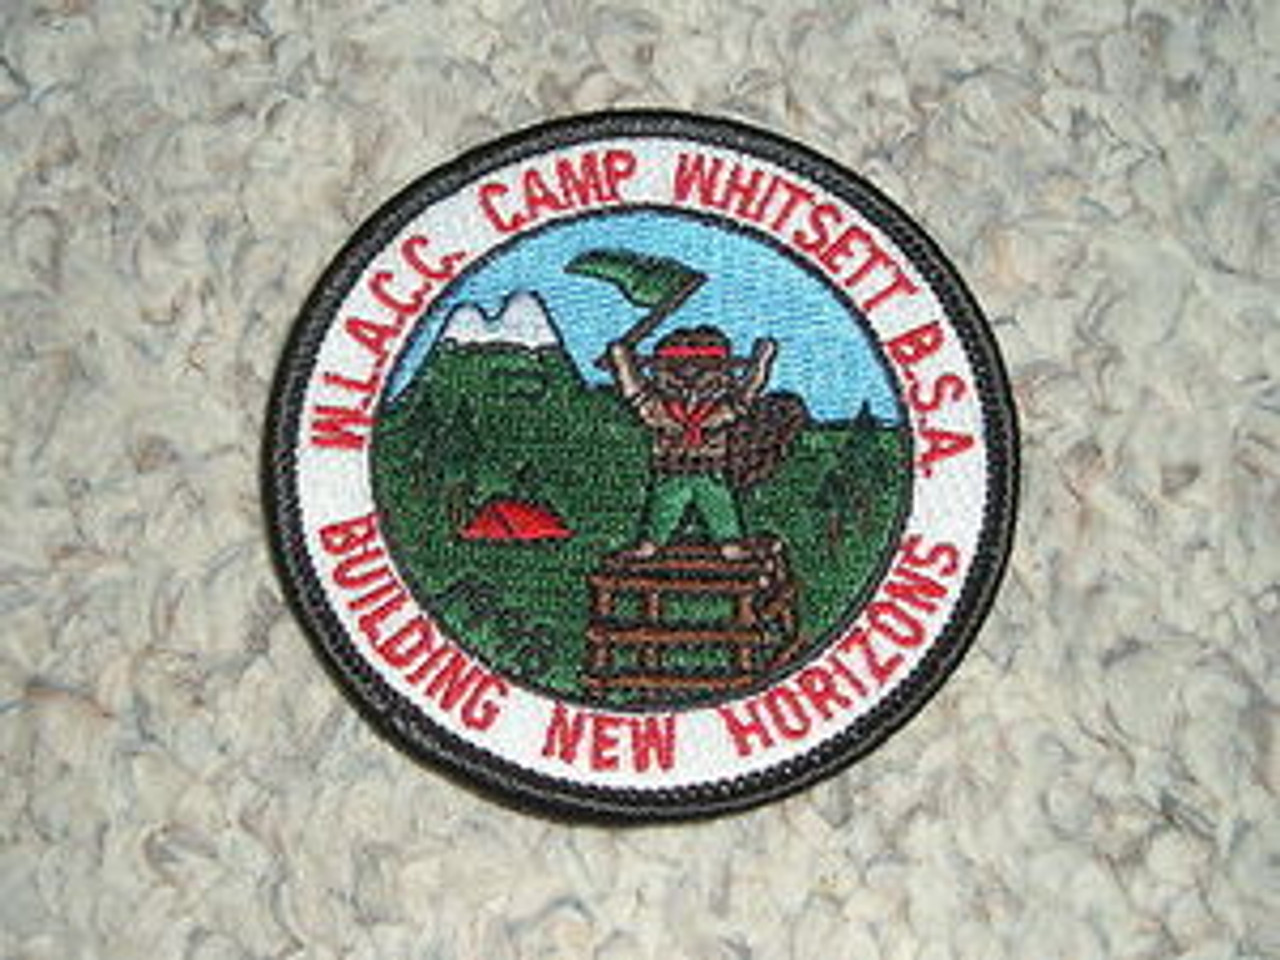 1998 Camp Whitsett Patch - Scout